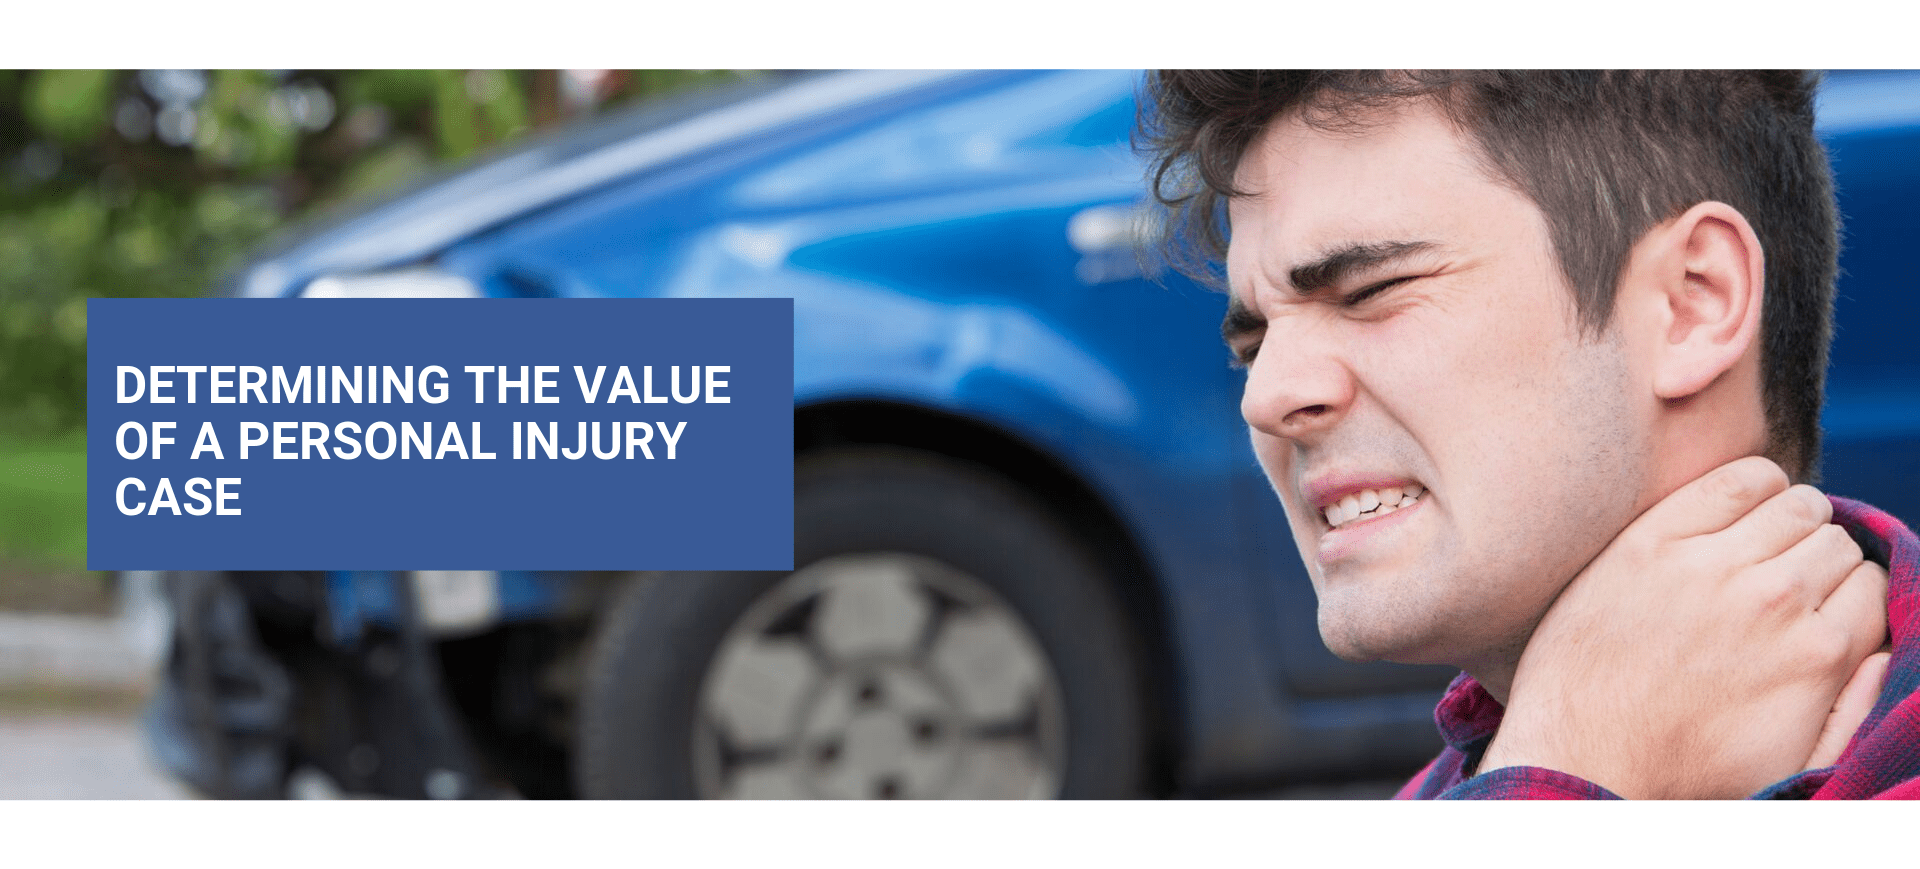 Determining the Value of a Personal Injury Case